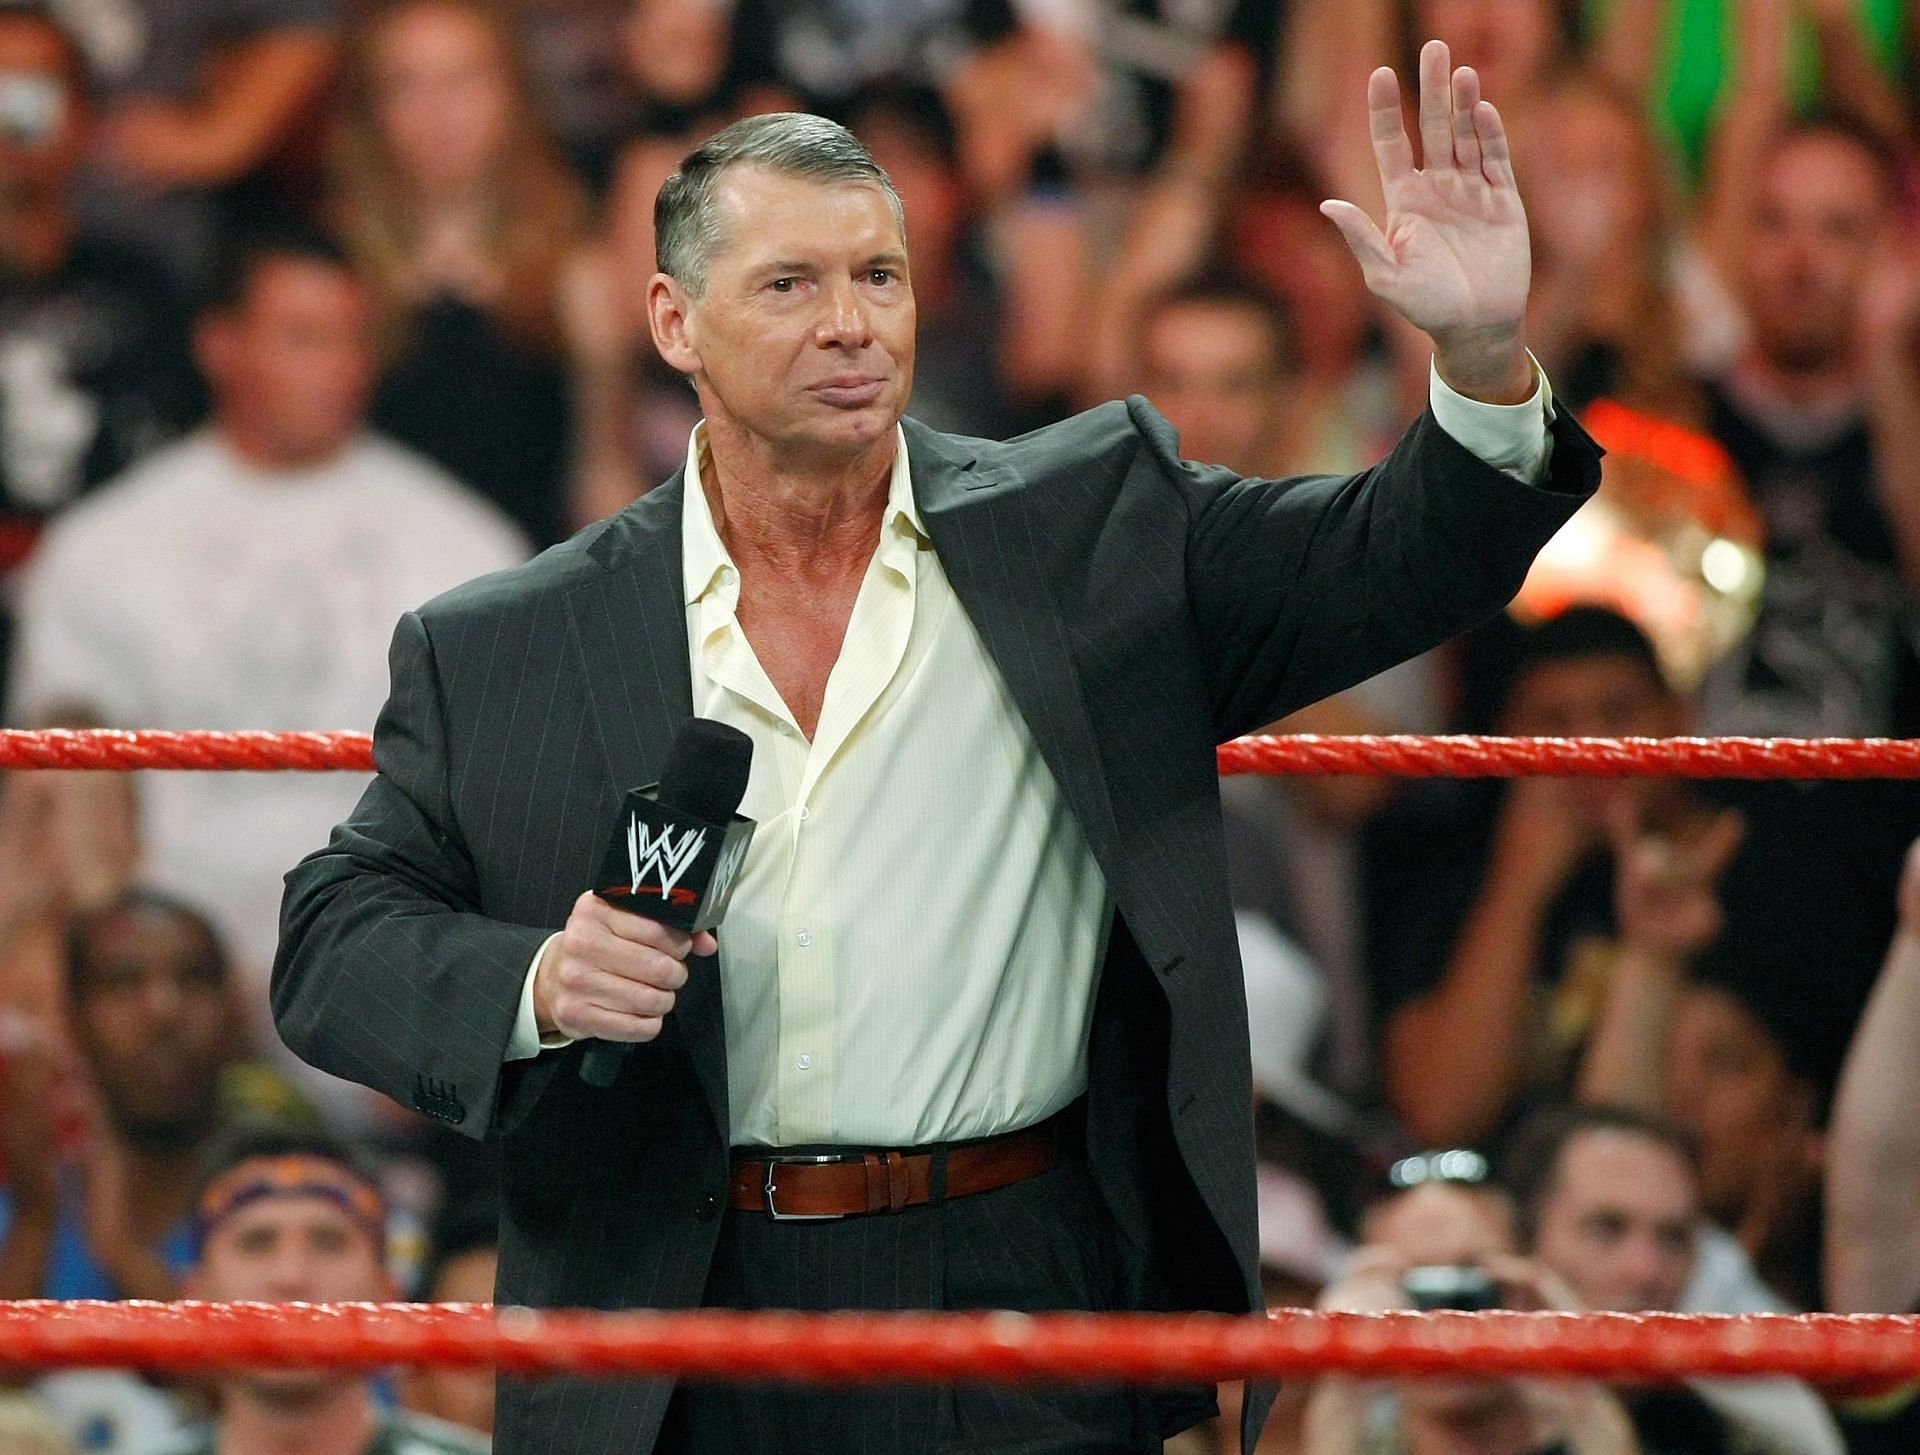 Vince McMahon will be making an appearance on WWE SmackDown tonight